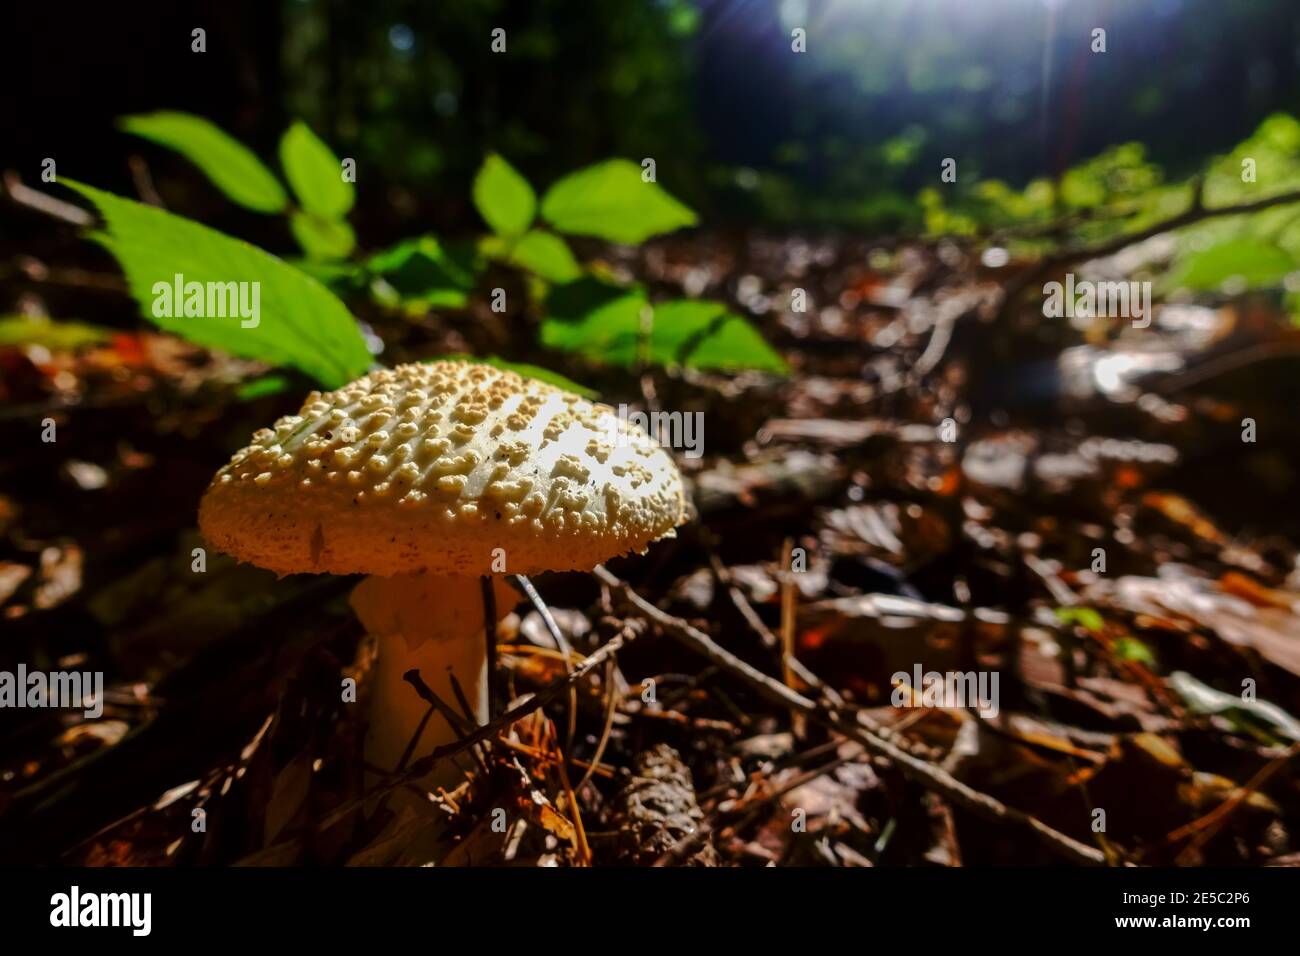 shining toxic mushroom in the sun on the forest floor Stock Photo